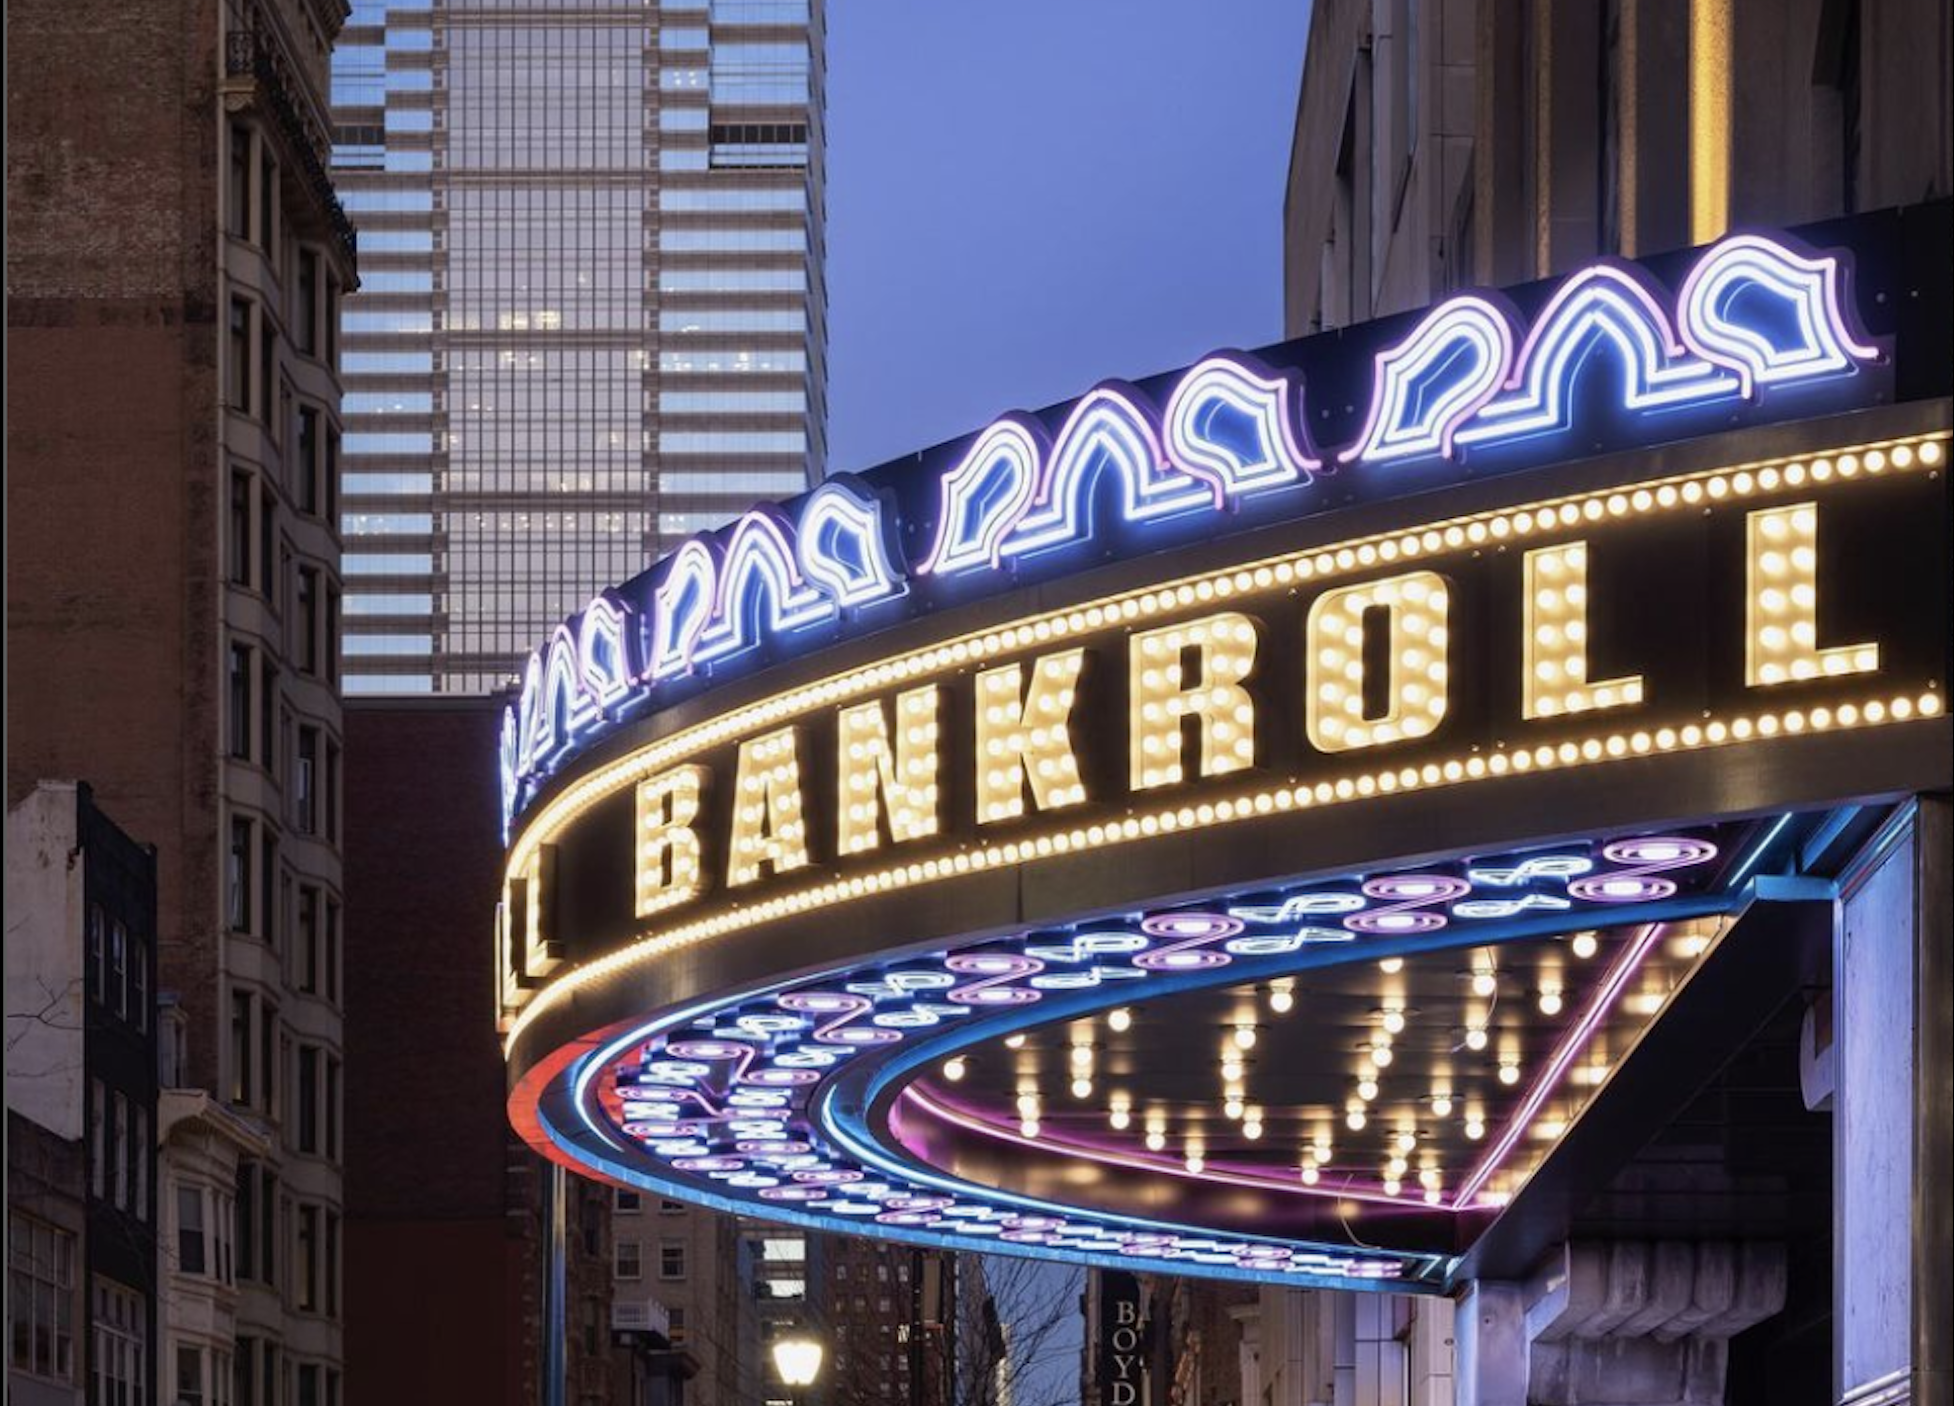 A lighted venue sign that displaces the name “Bankroll” across in the evening. 